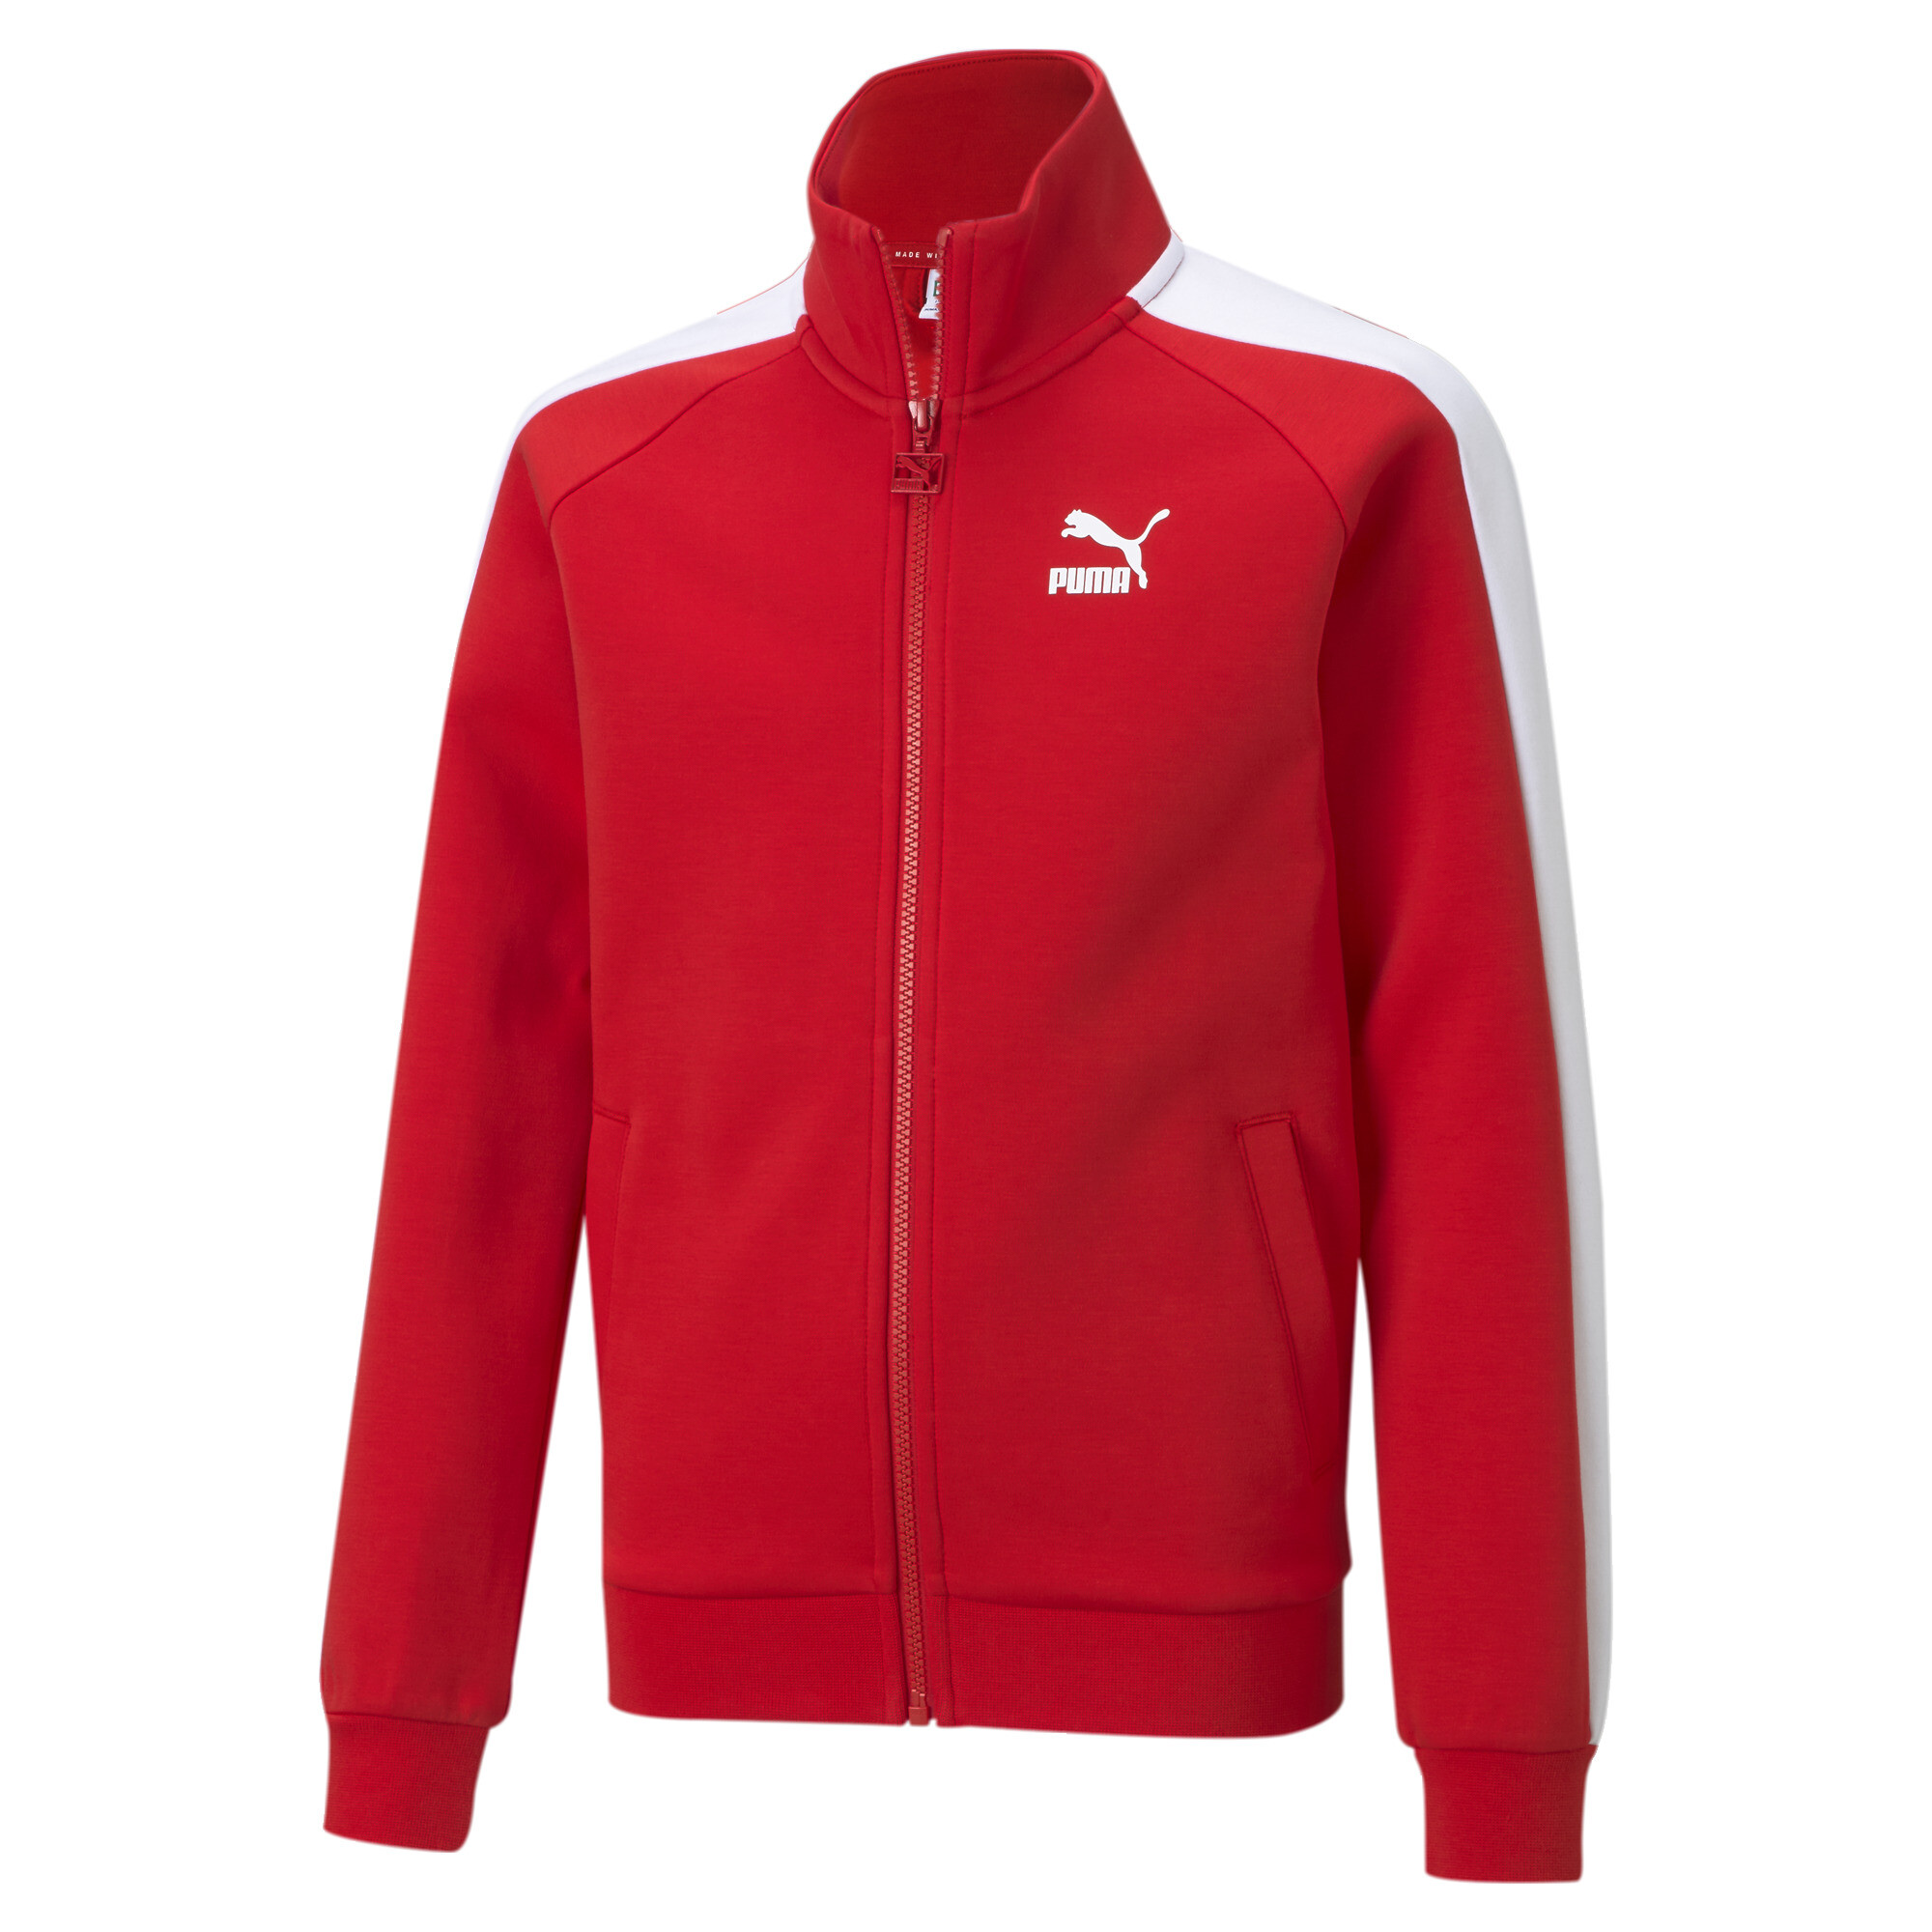 PUMA Iconic T7 Track Jacket In Red, Size 13-14 Youth